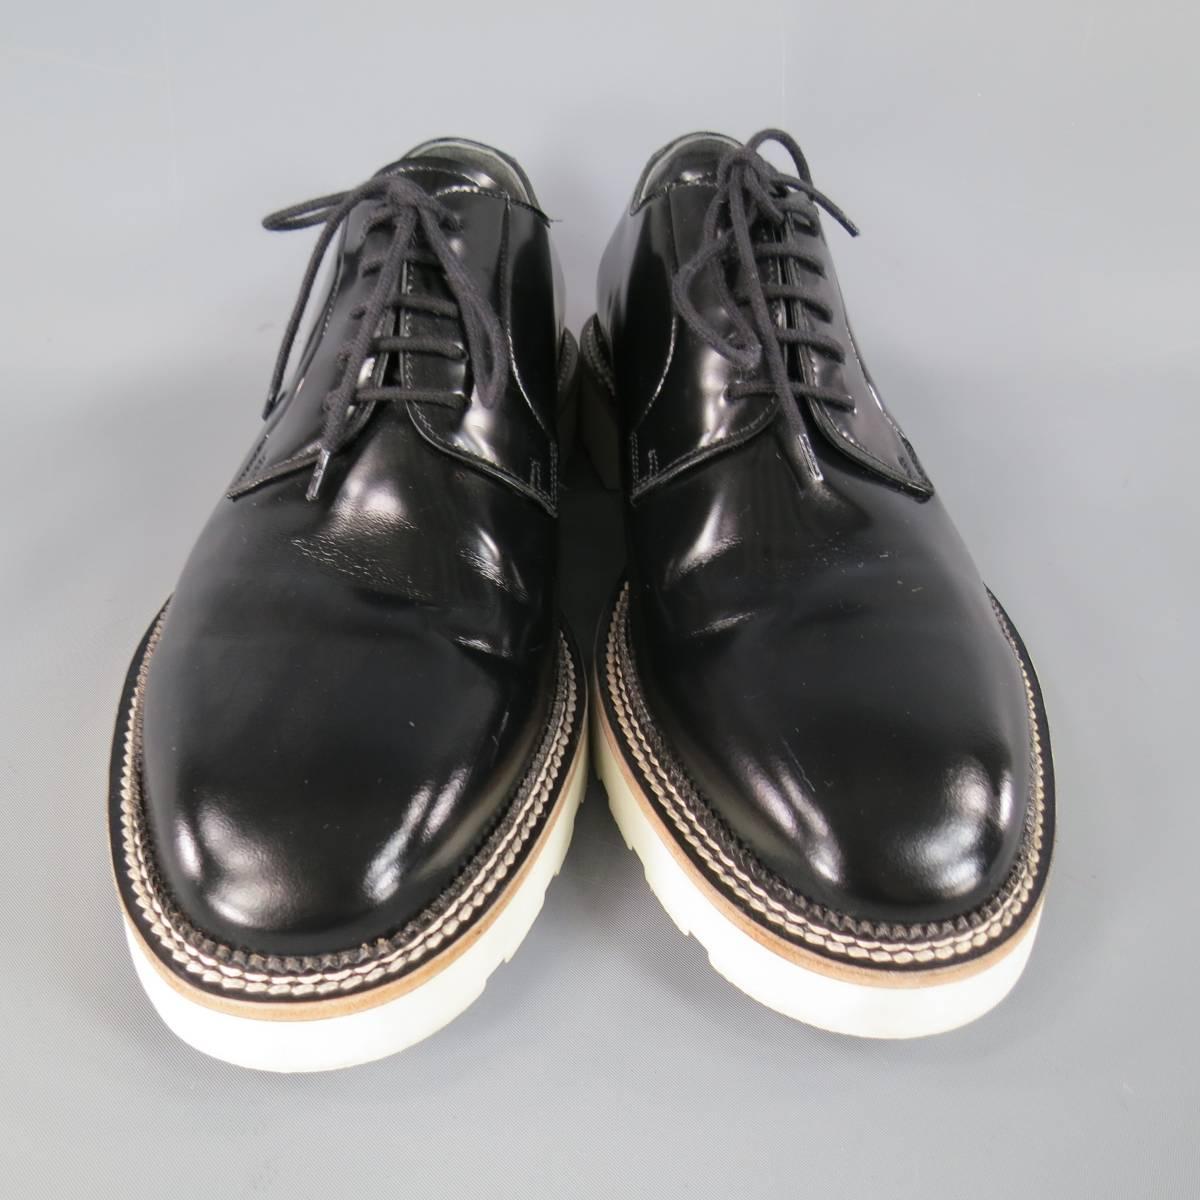 Chic ALEXANDER MCQUEEN derbys in smooth black leather with a stripe of tan and a thick cream rubber sole. Made in Italy.
 
Excellent Pre-Owned Condition.
Marked: IT 45
 
Outsole: 12.65 x 4.75 in.